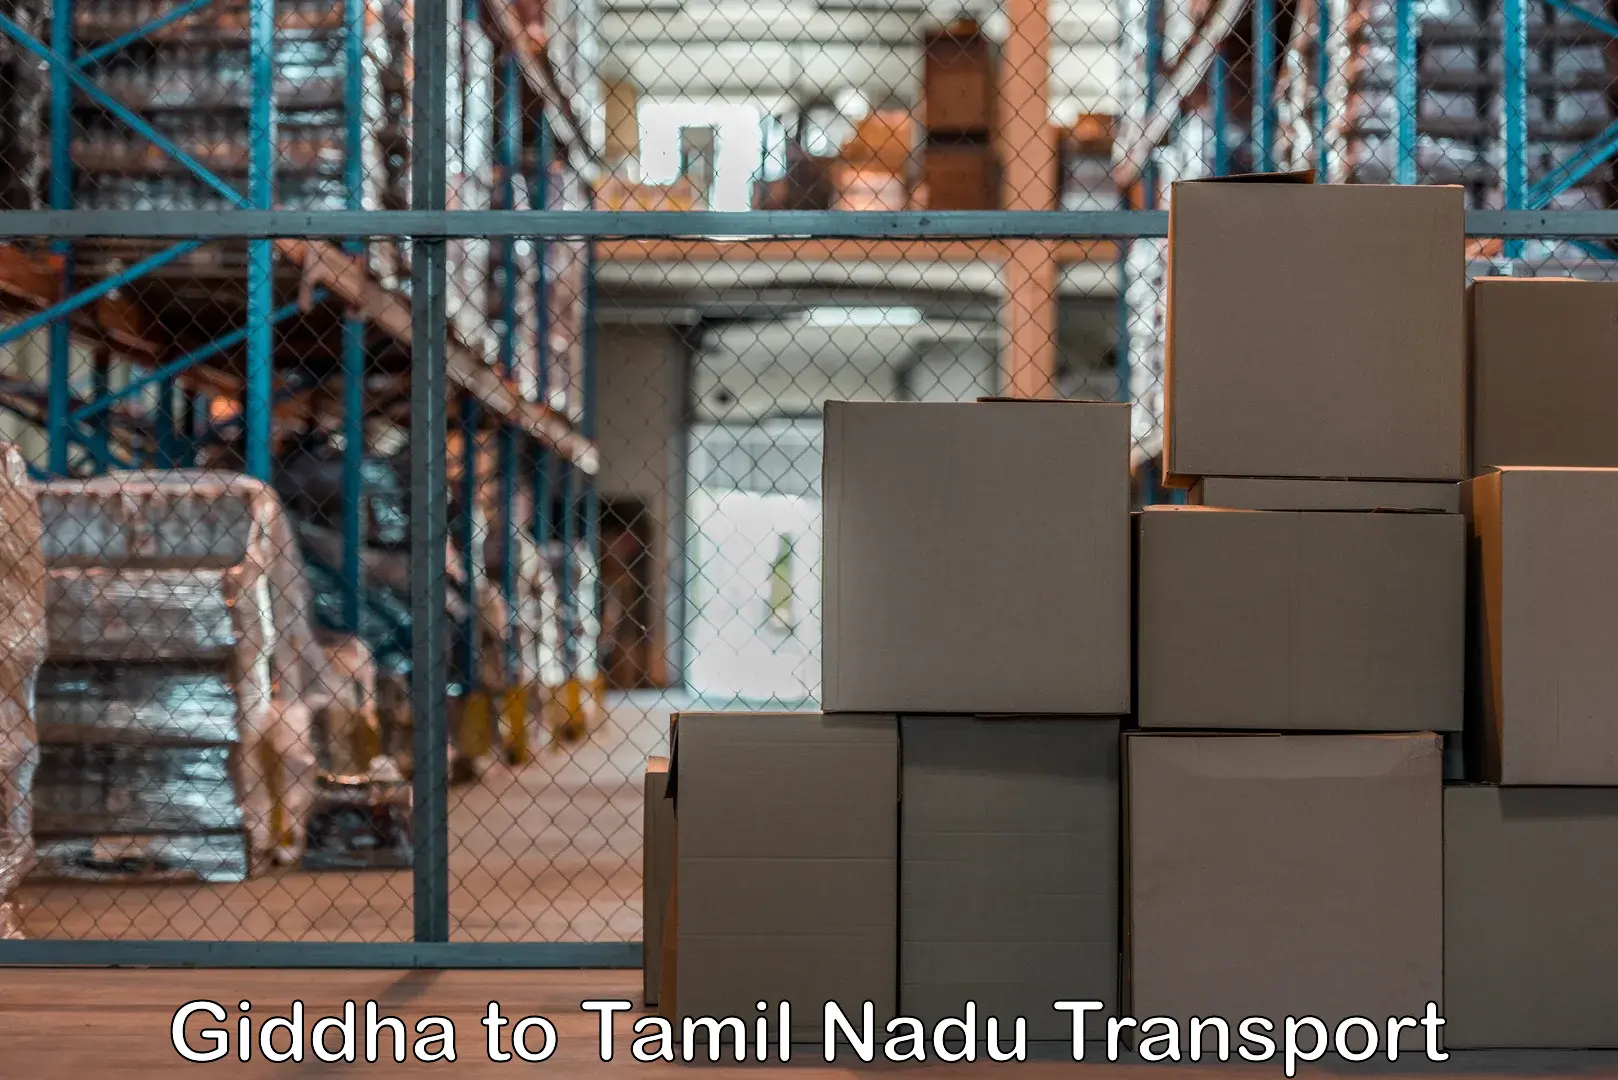 Express transport services Giddha to Cuddalore